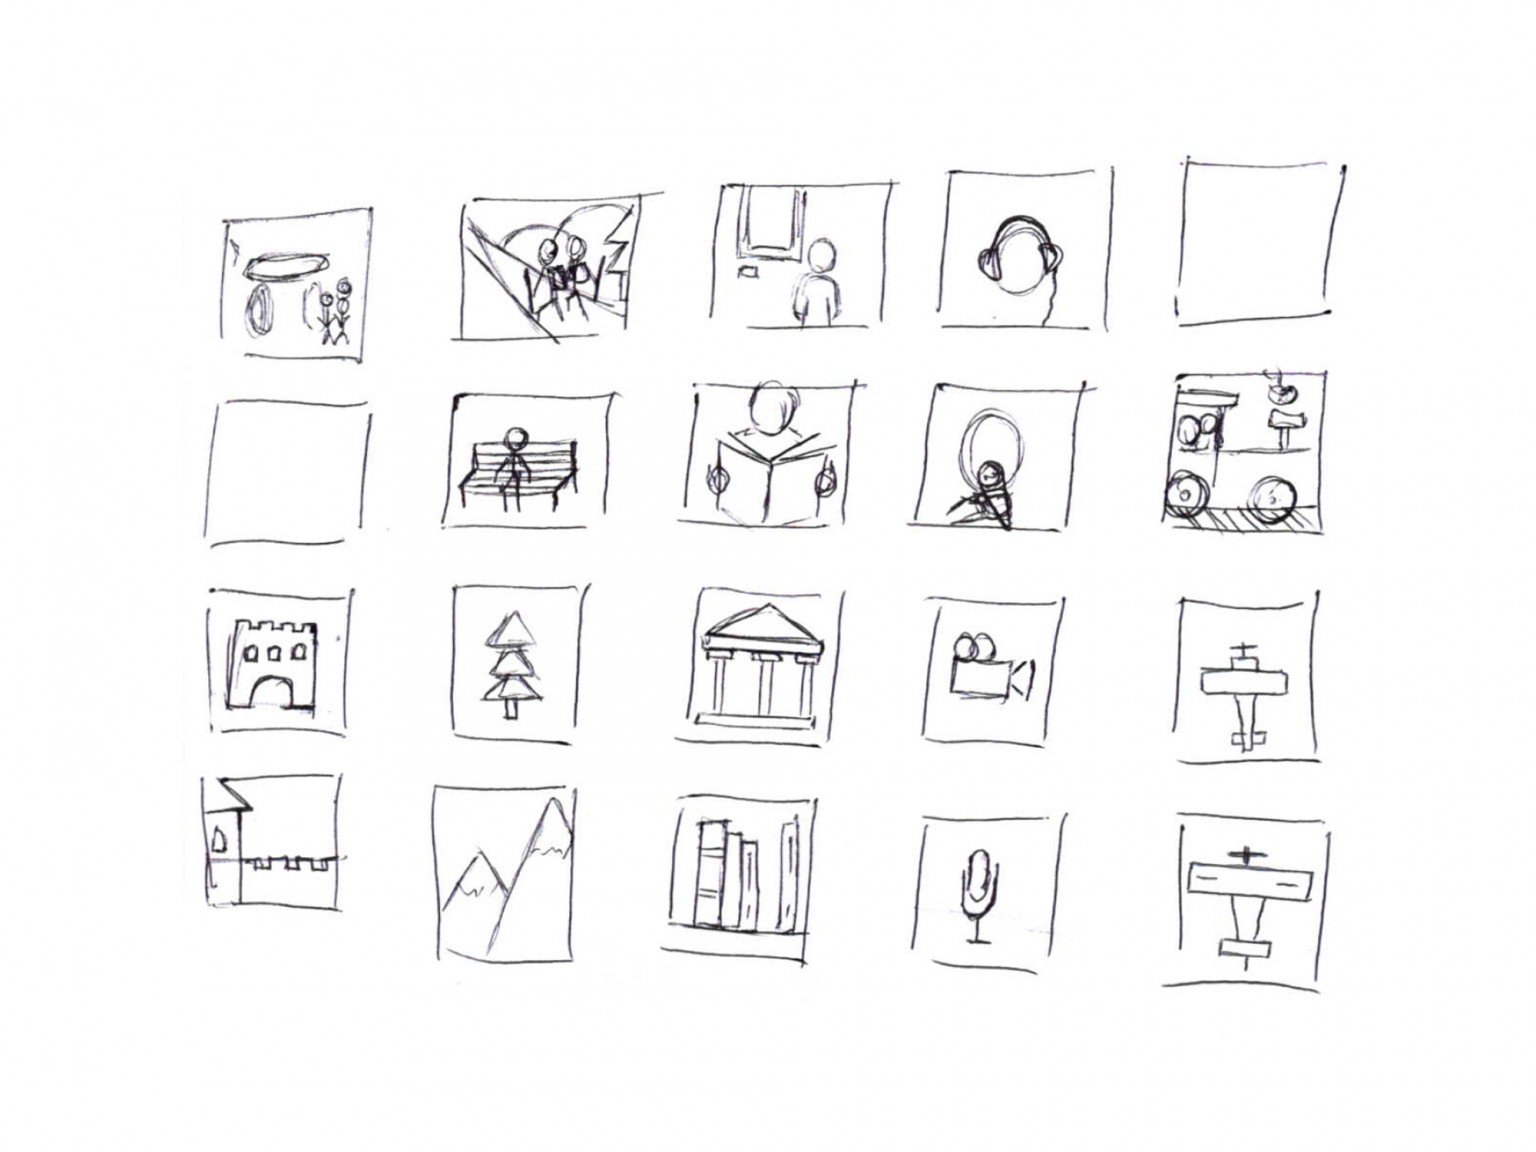 Initial sketches for icons